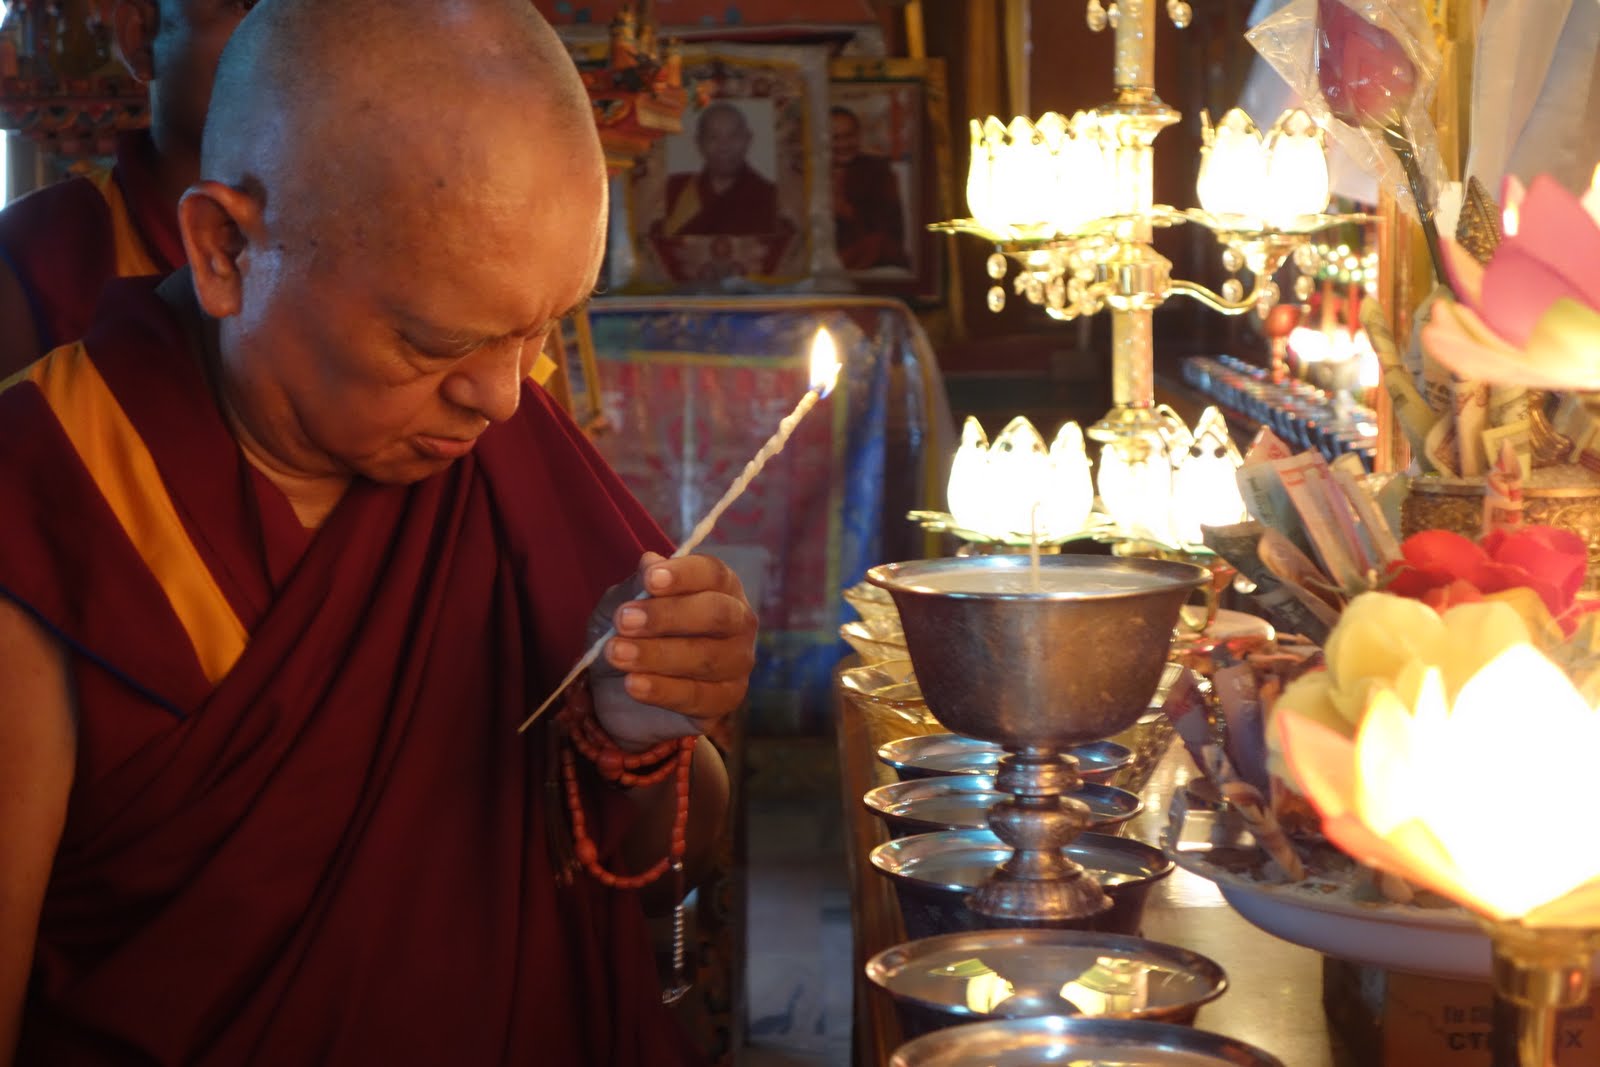 Rinpoche offering butter lamp. August 8, 2013 Photo: Ven. Roger Kunsang